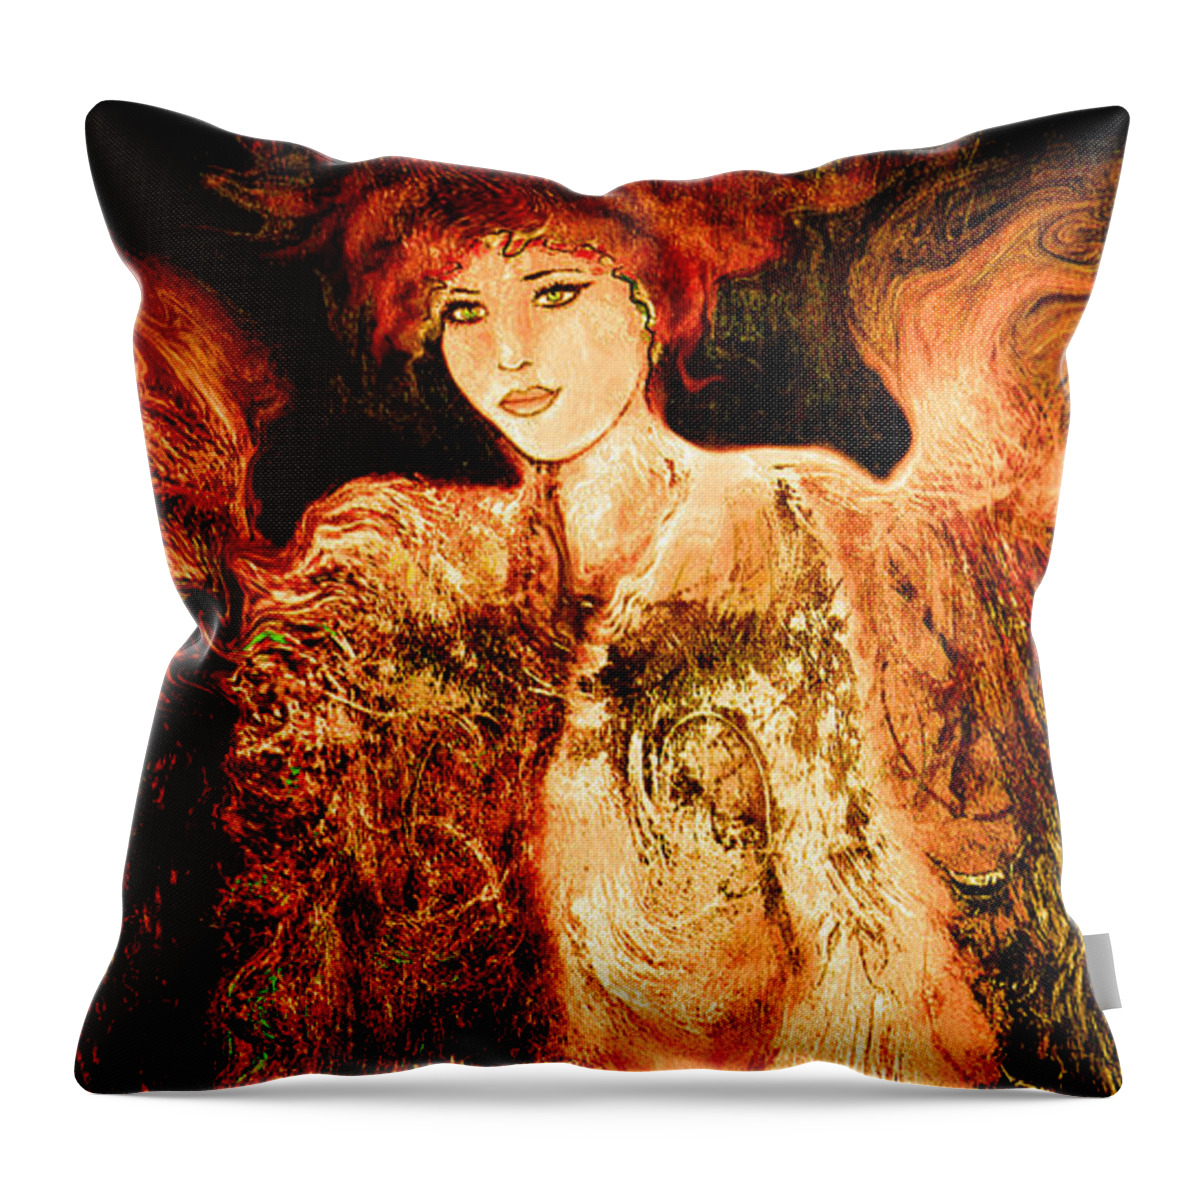 Angel Throw Pillow featuring the mixed media Guardian Angel by Natalie Holland